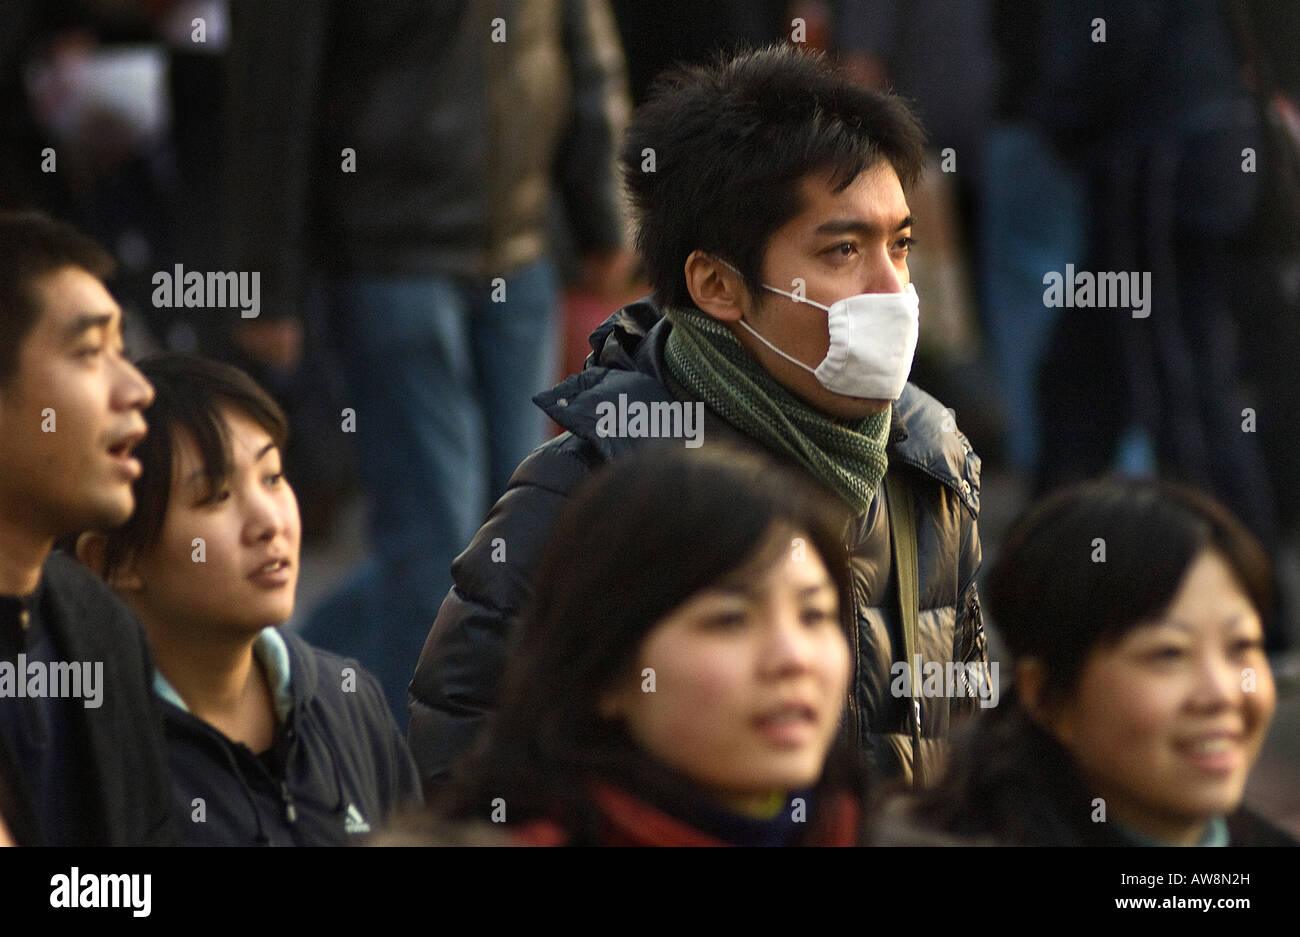 Pollution forces many to wear facemasks in the streets of central Beijing. Stock Photo